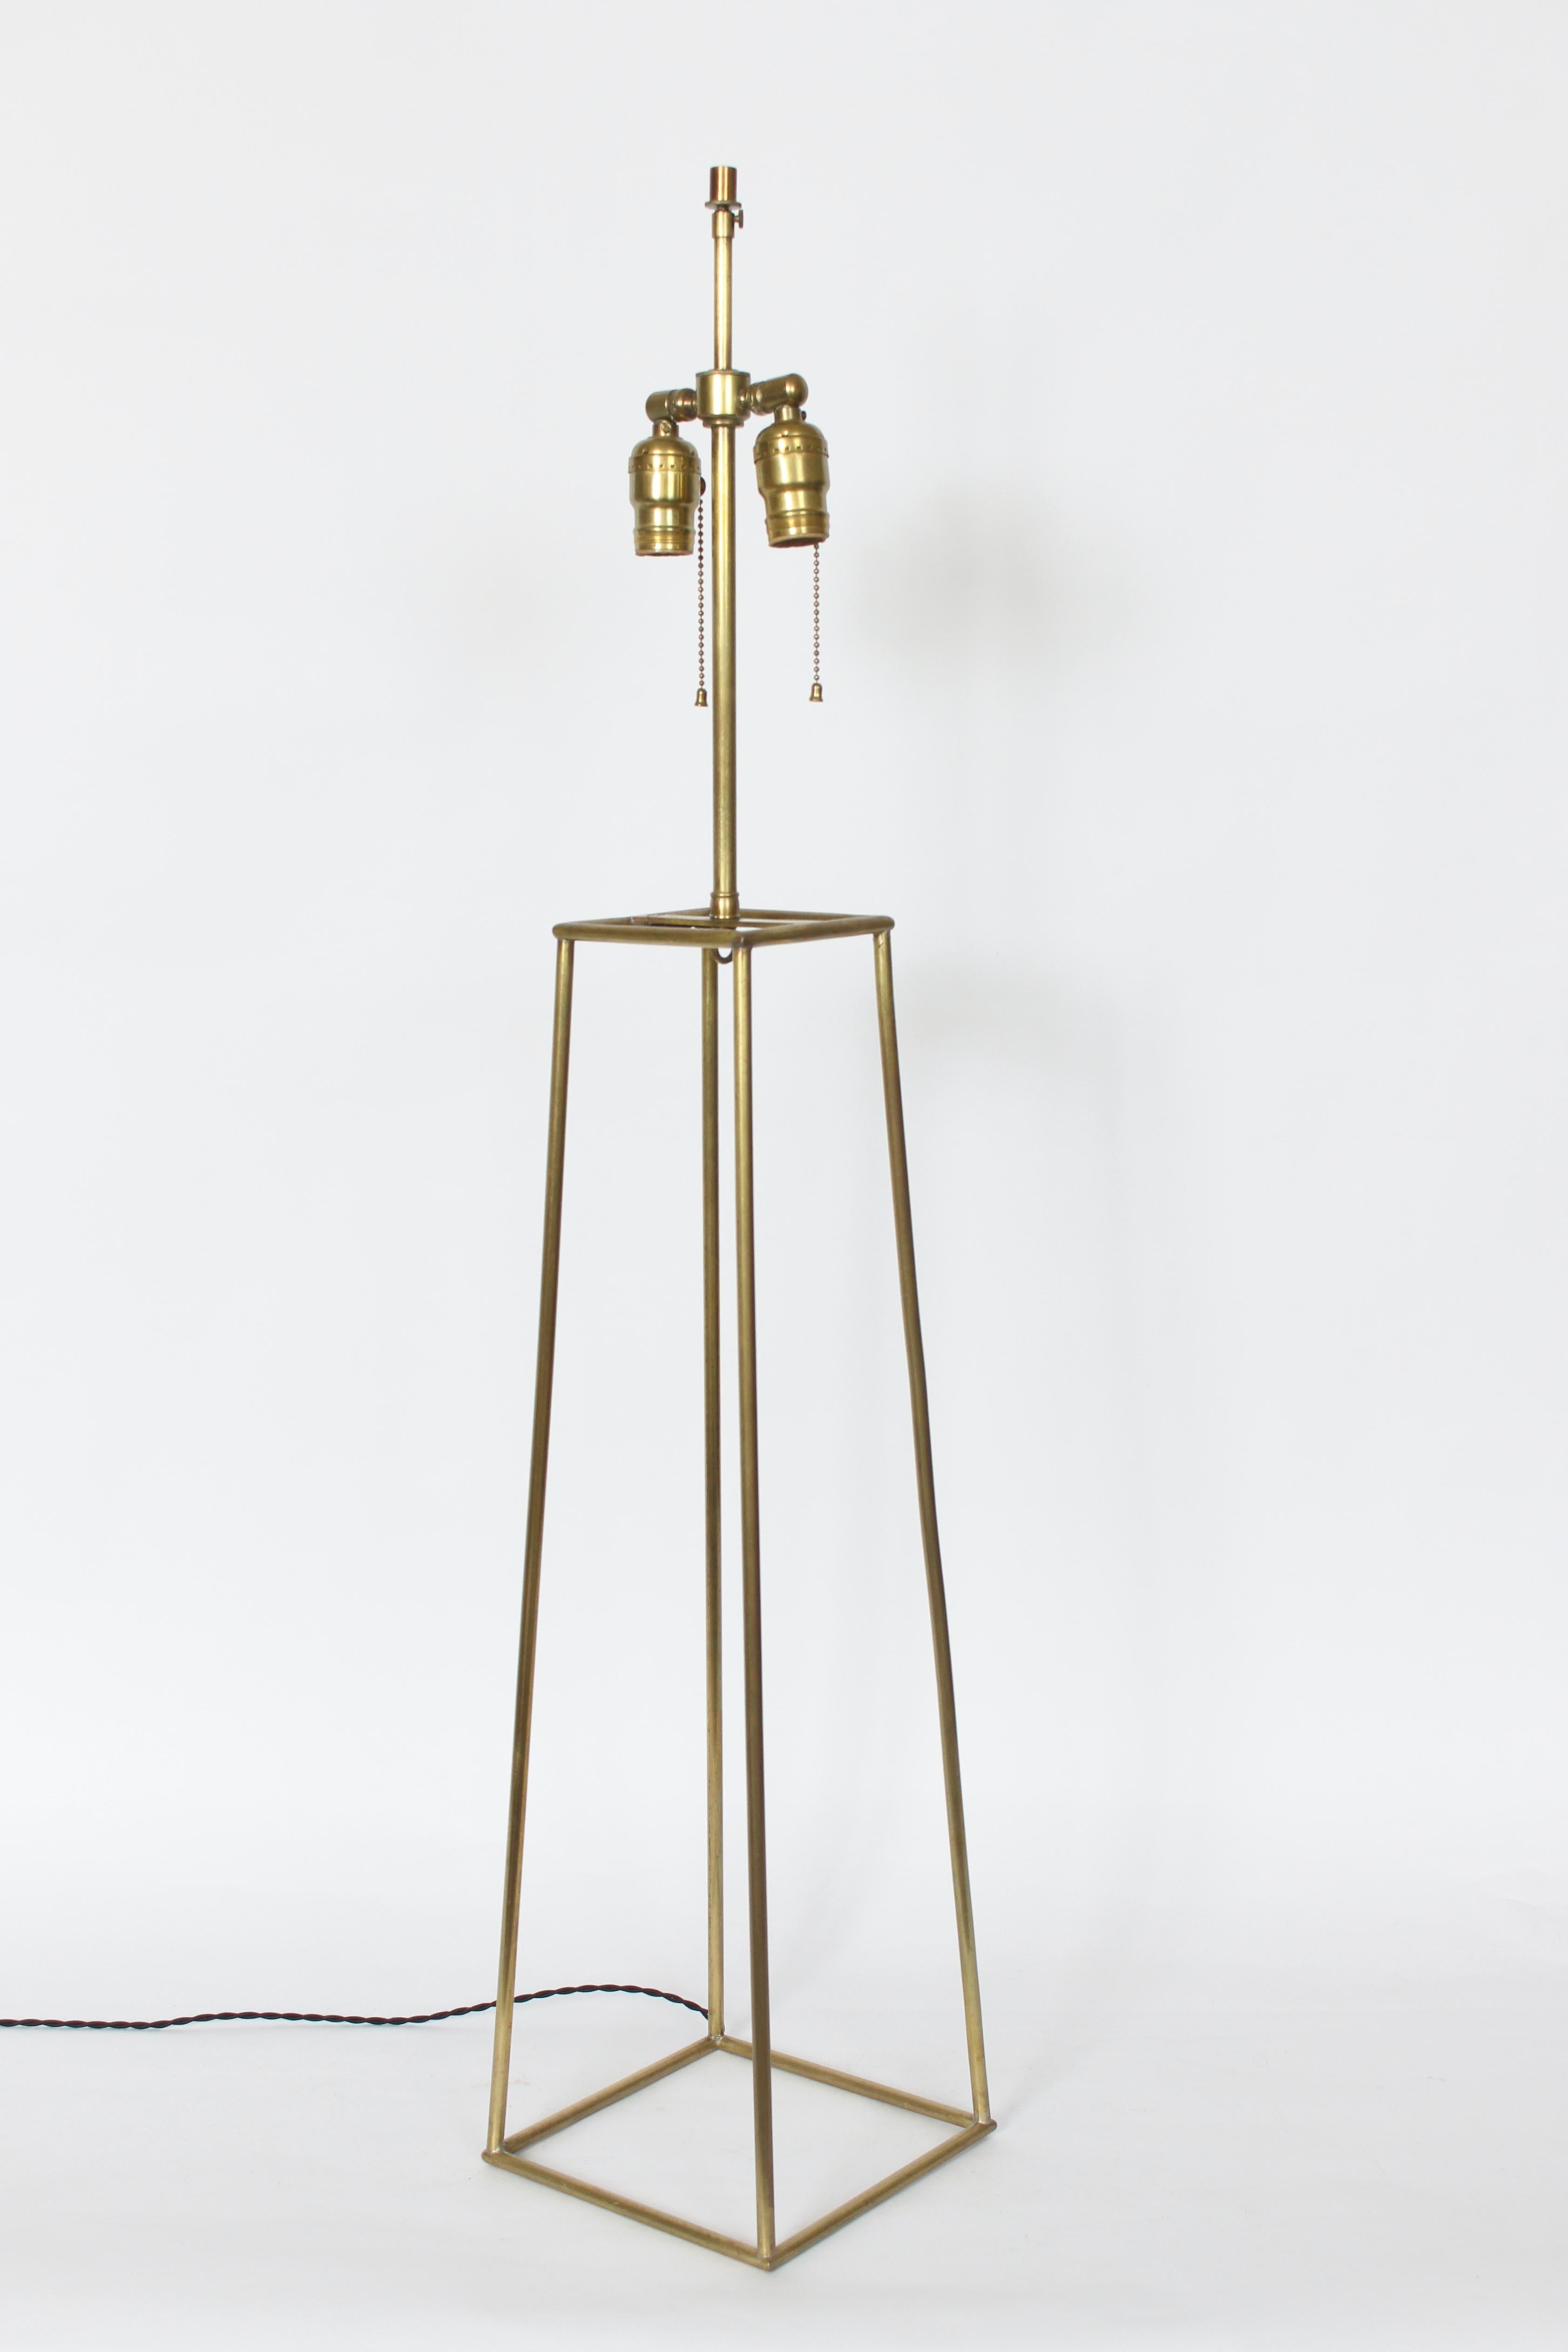 Substantial Tommi Parzinger Style Brass Open Box Form Table Lamp, 1950s For Sale 12